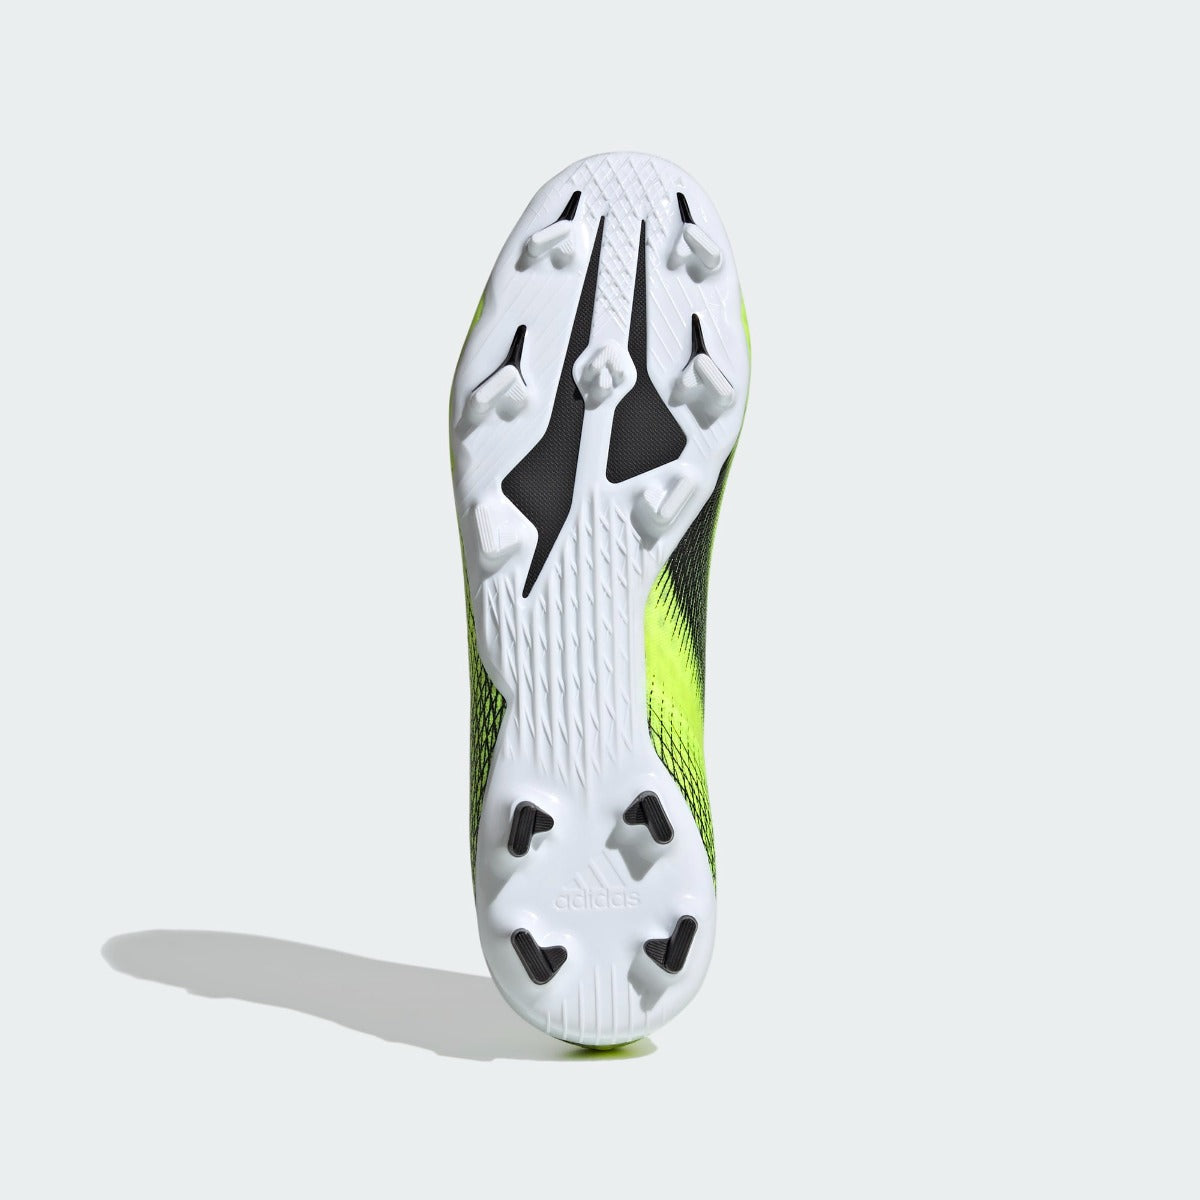 Adidas X Ghosted .3 Laceless FG - Volt-Black